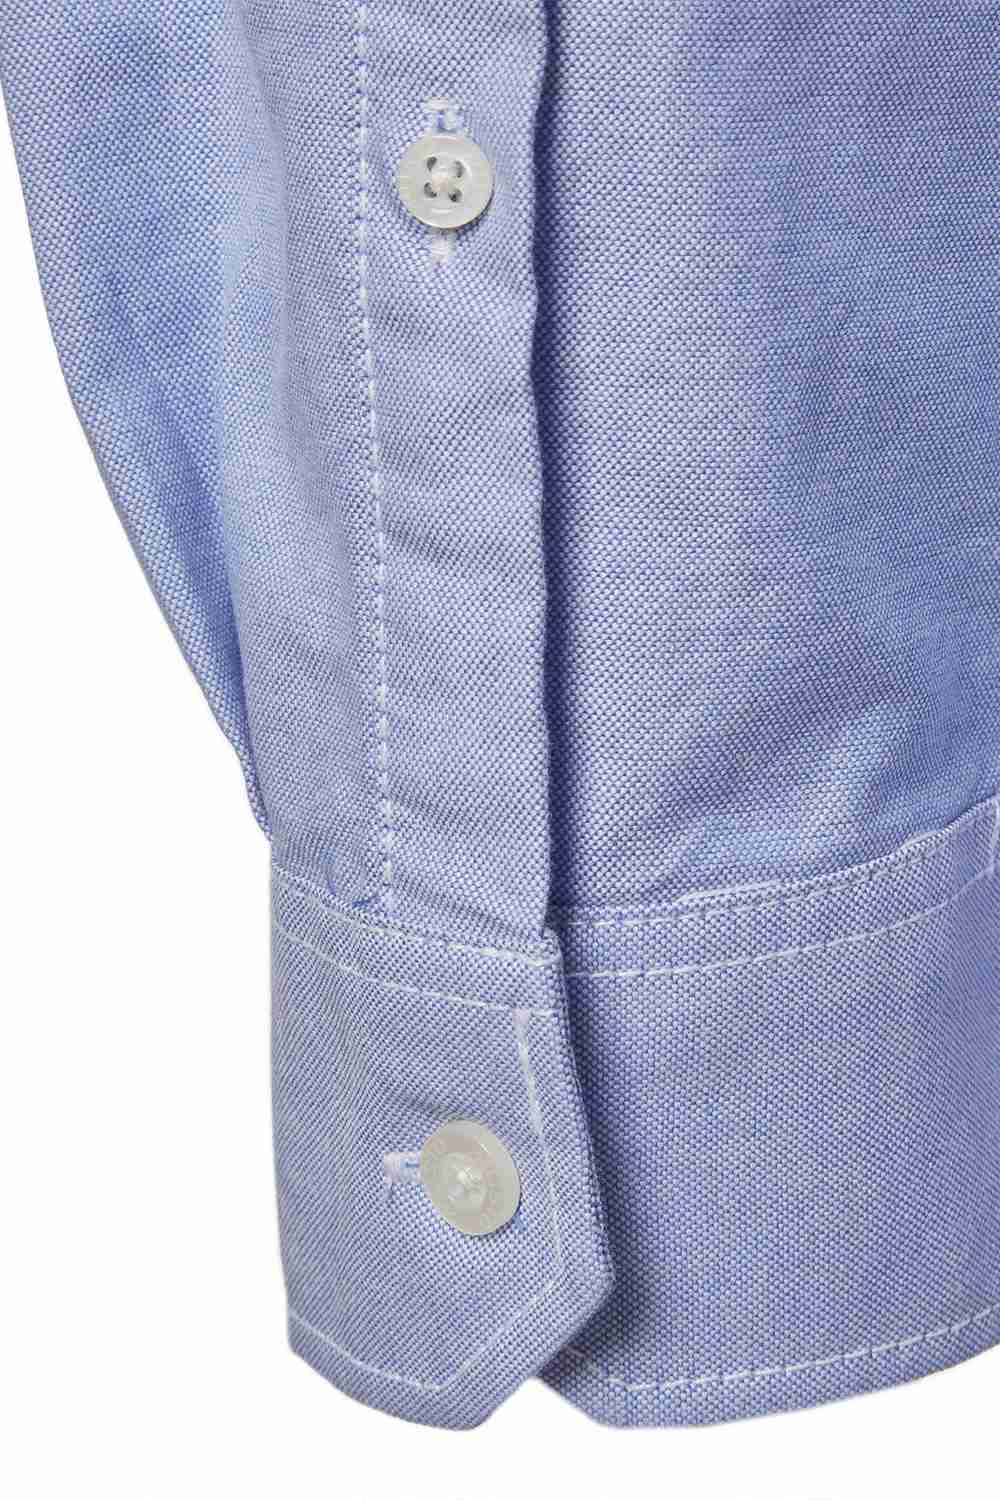 Musto Aiden Long Sleeve Oxford Shirt showing the pale blue sleeve end and cuff